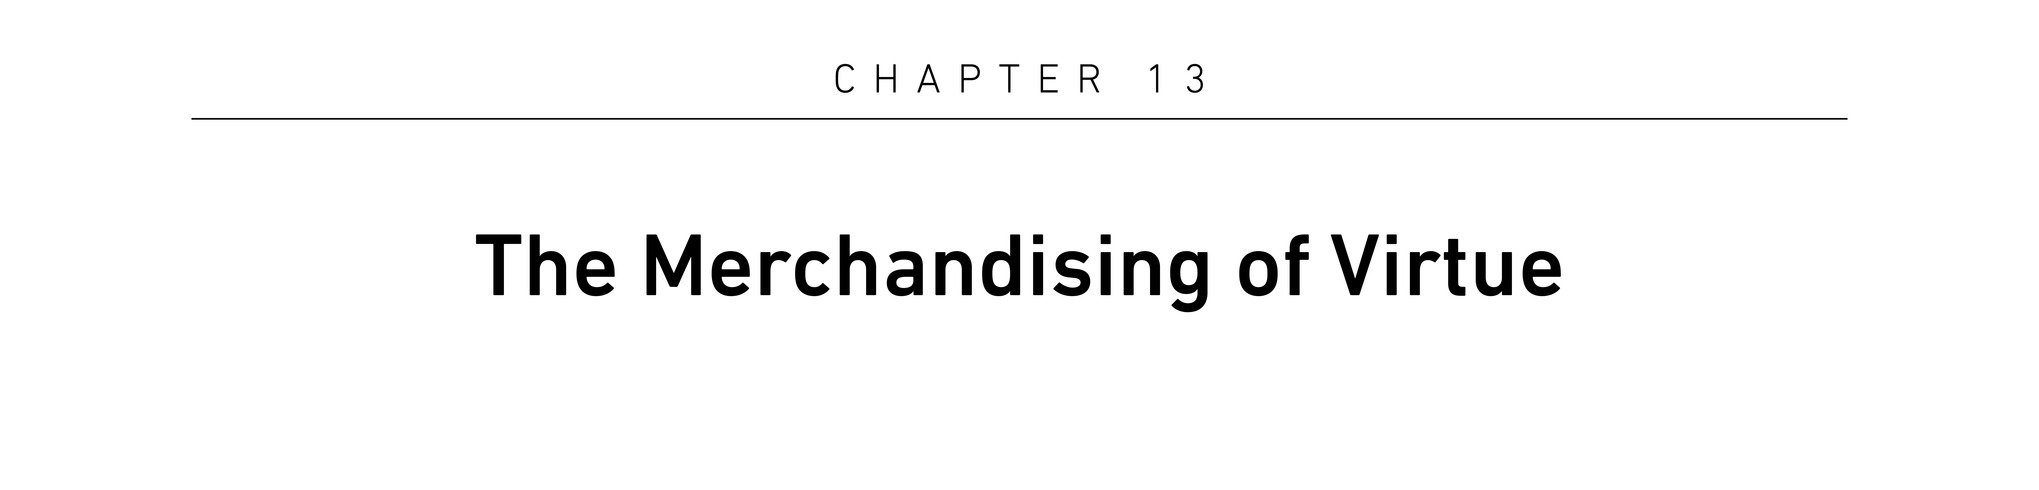 Chapter 13 The Merchandising of Virtue